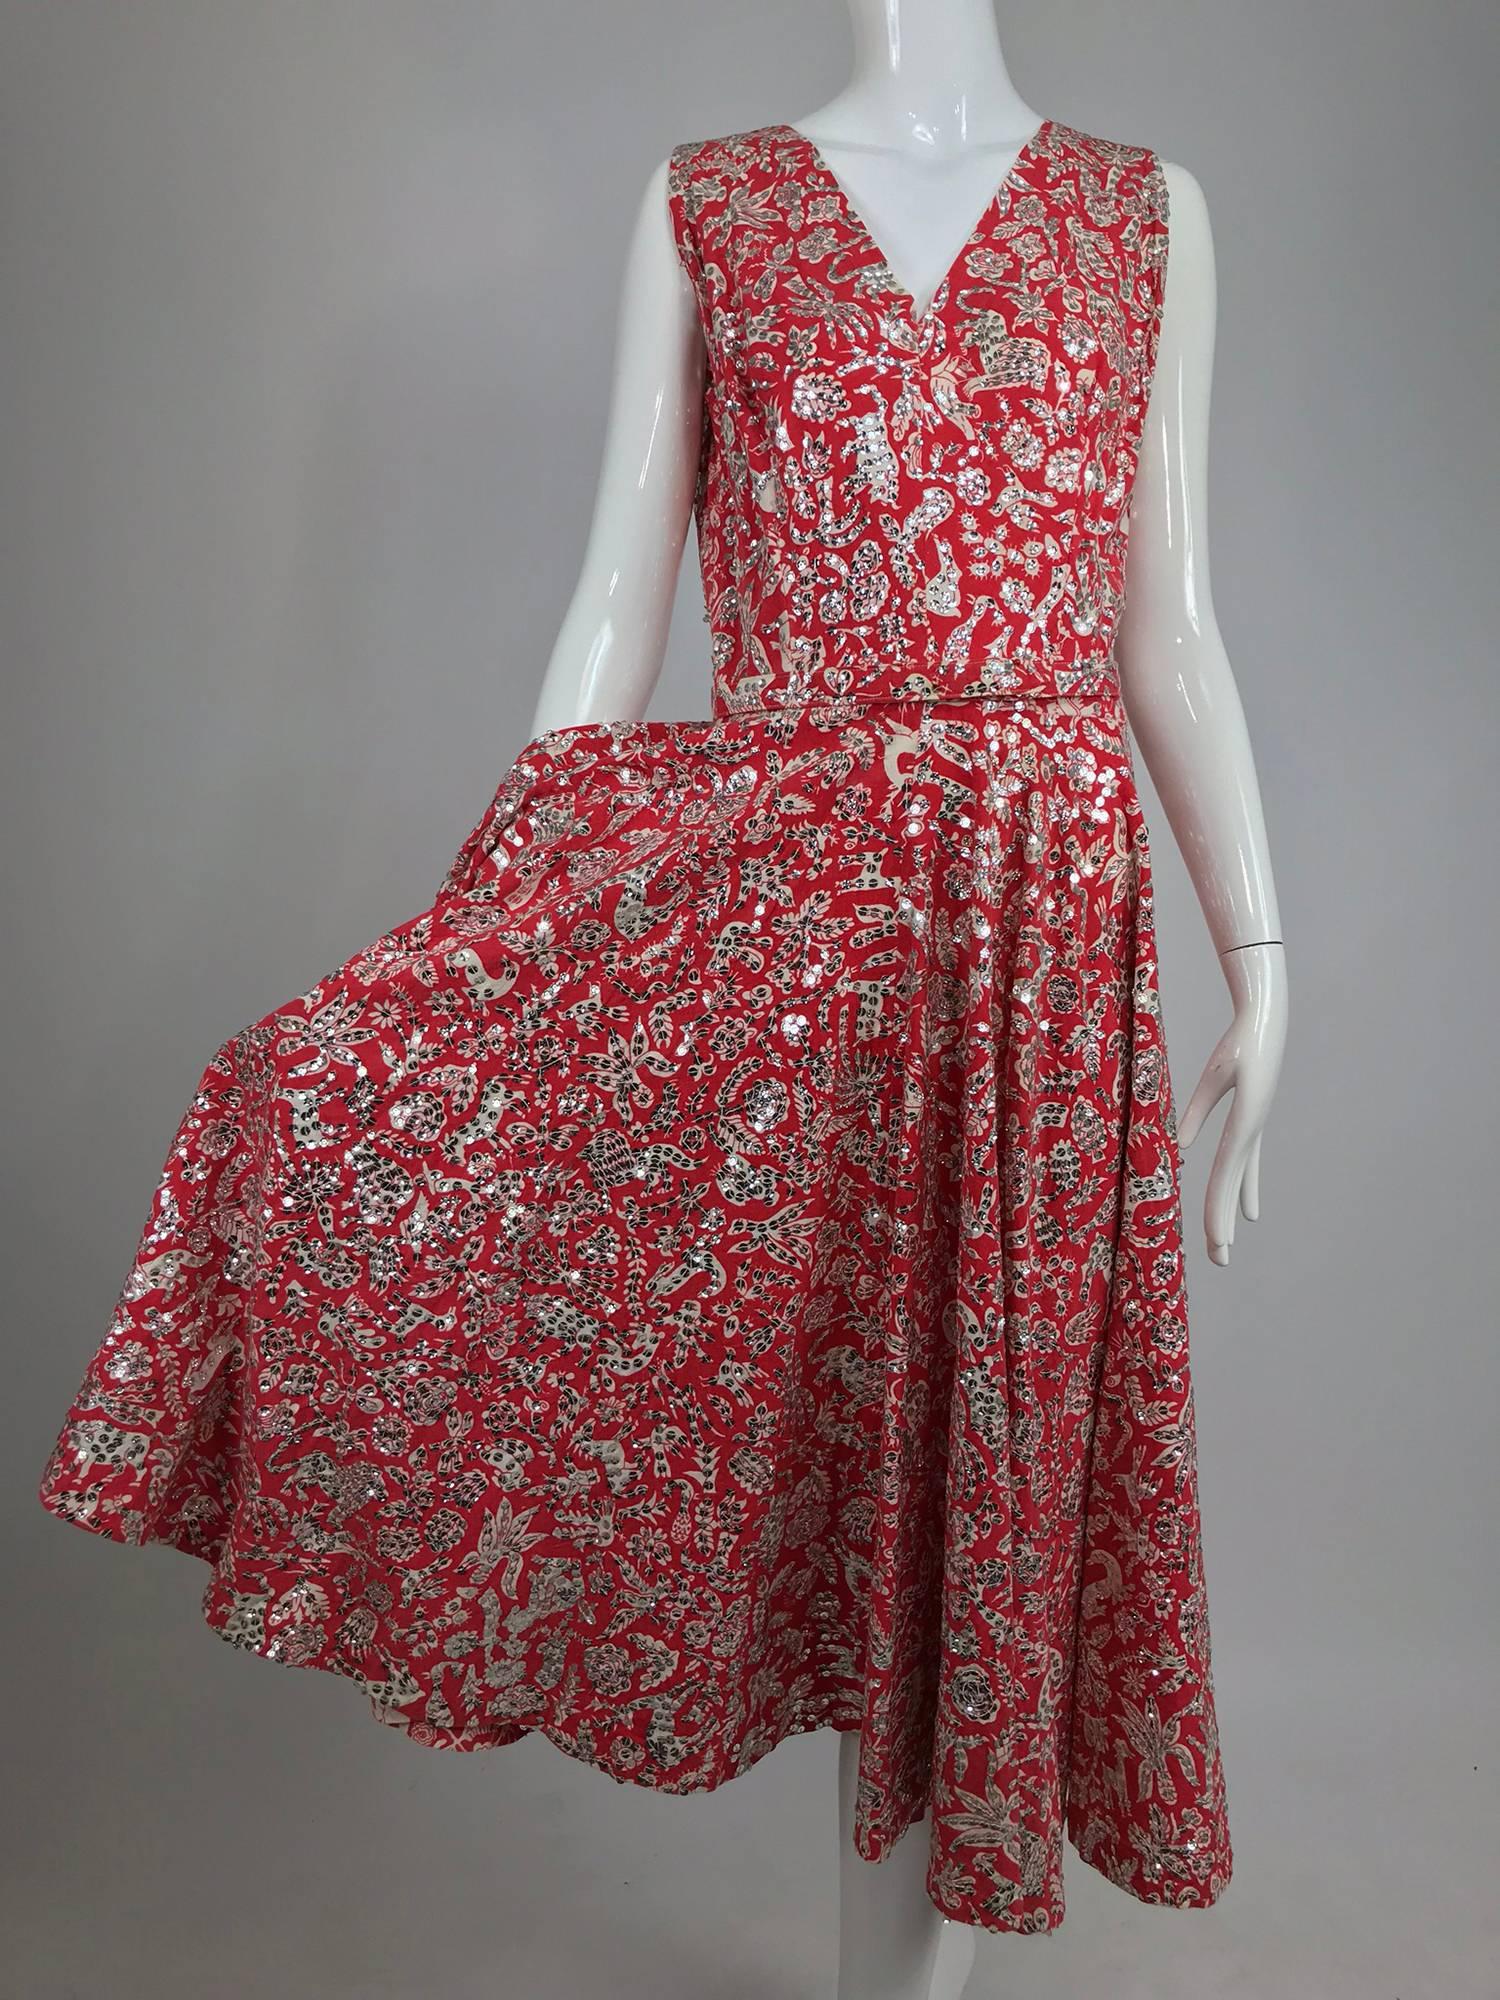 Women's Silver sequin coral printed dress and jacket Jor'elle Model Mexico 1950s